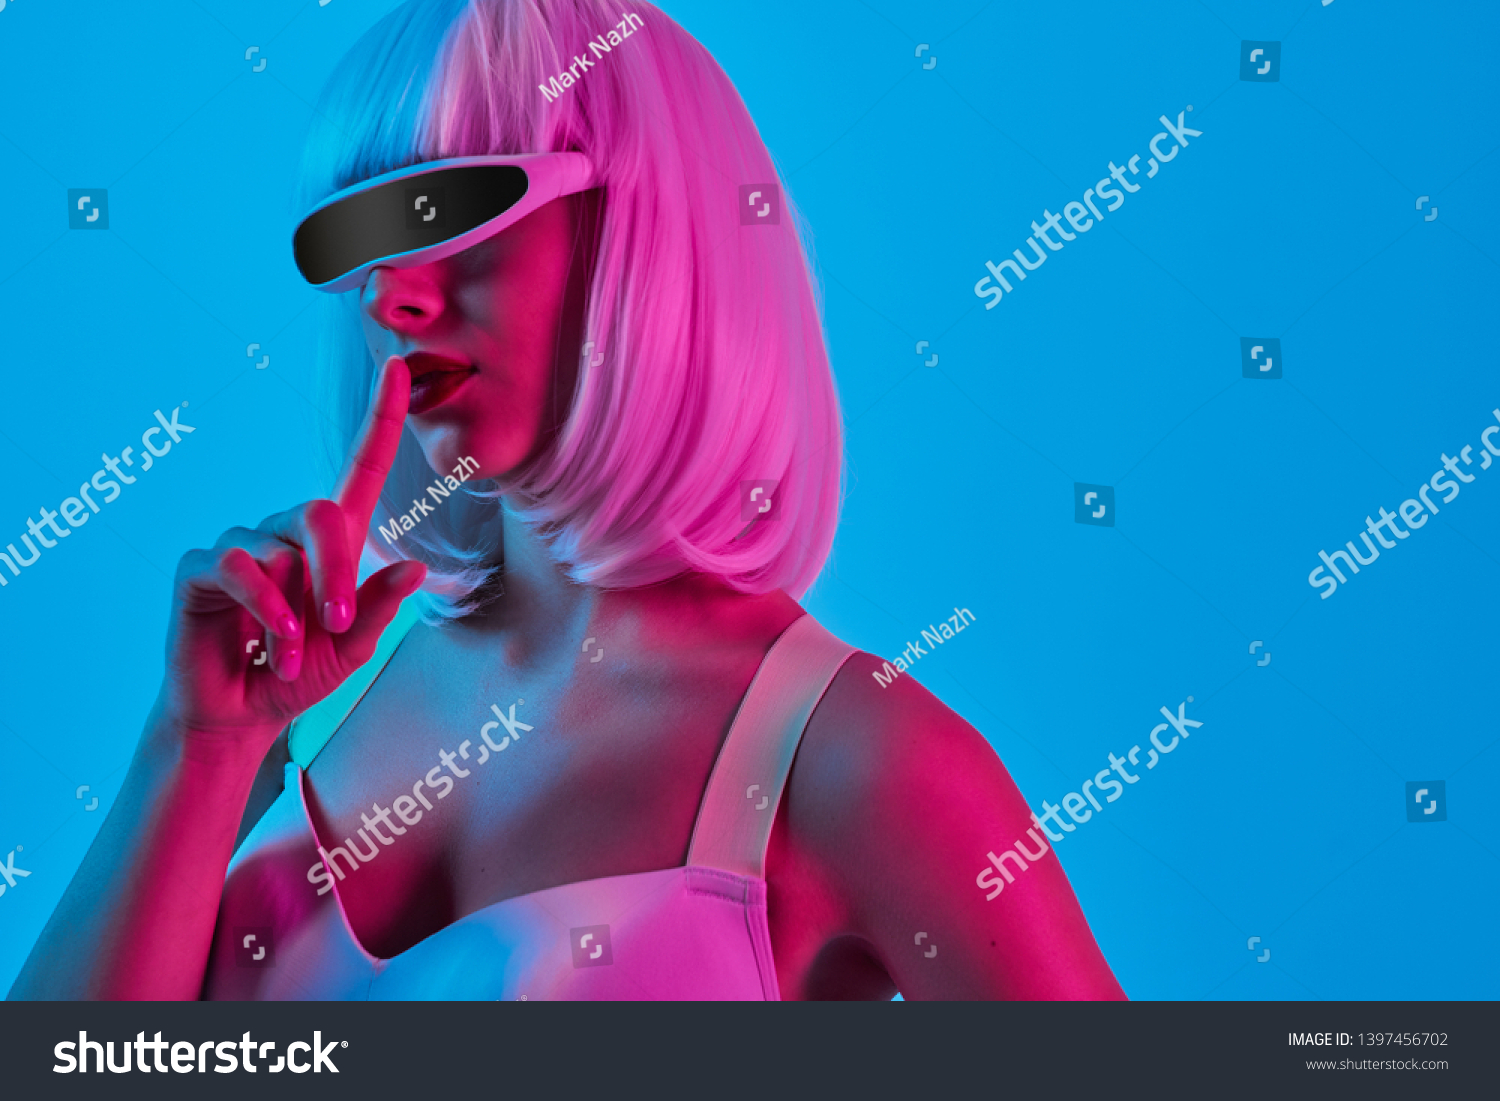 Futuristic alien woman in digital goggles keeping finger near lips and asking to be silent while standing under neon light on blue background #1397456702